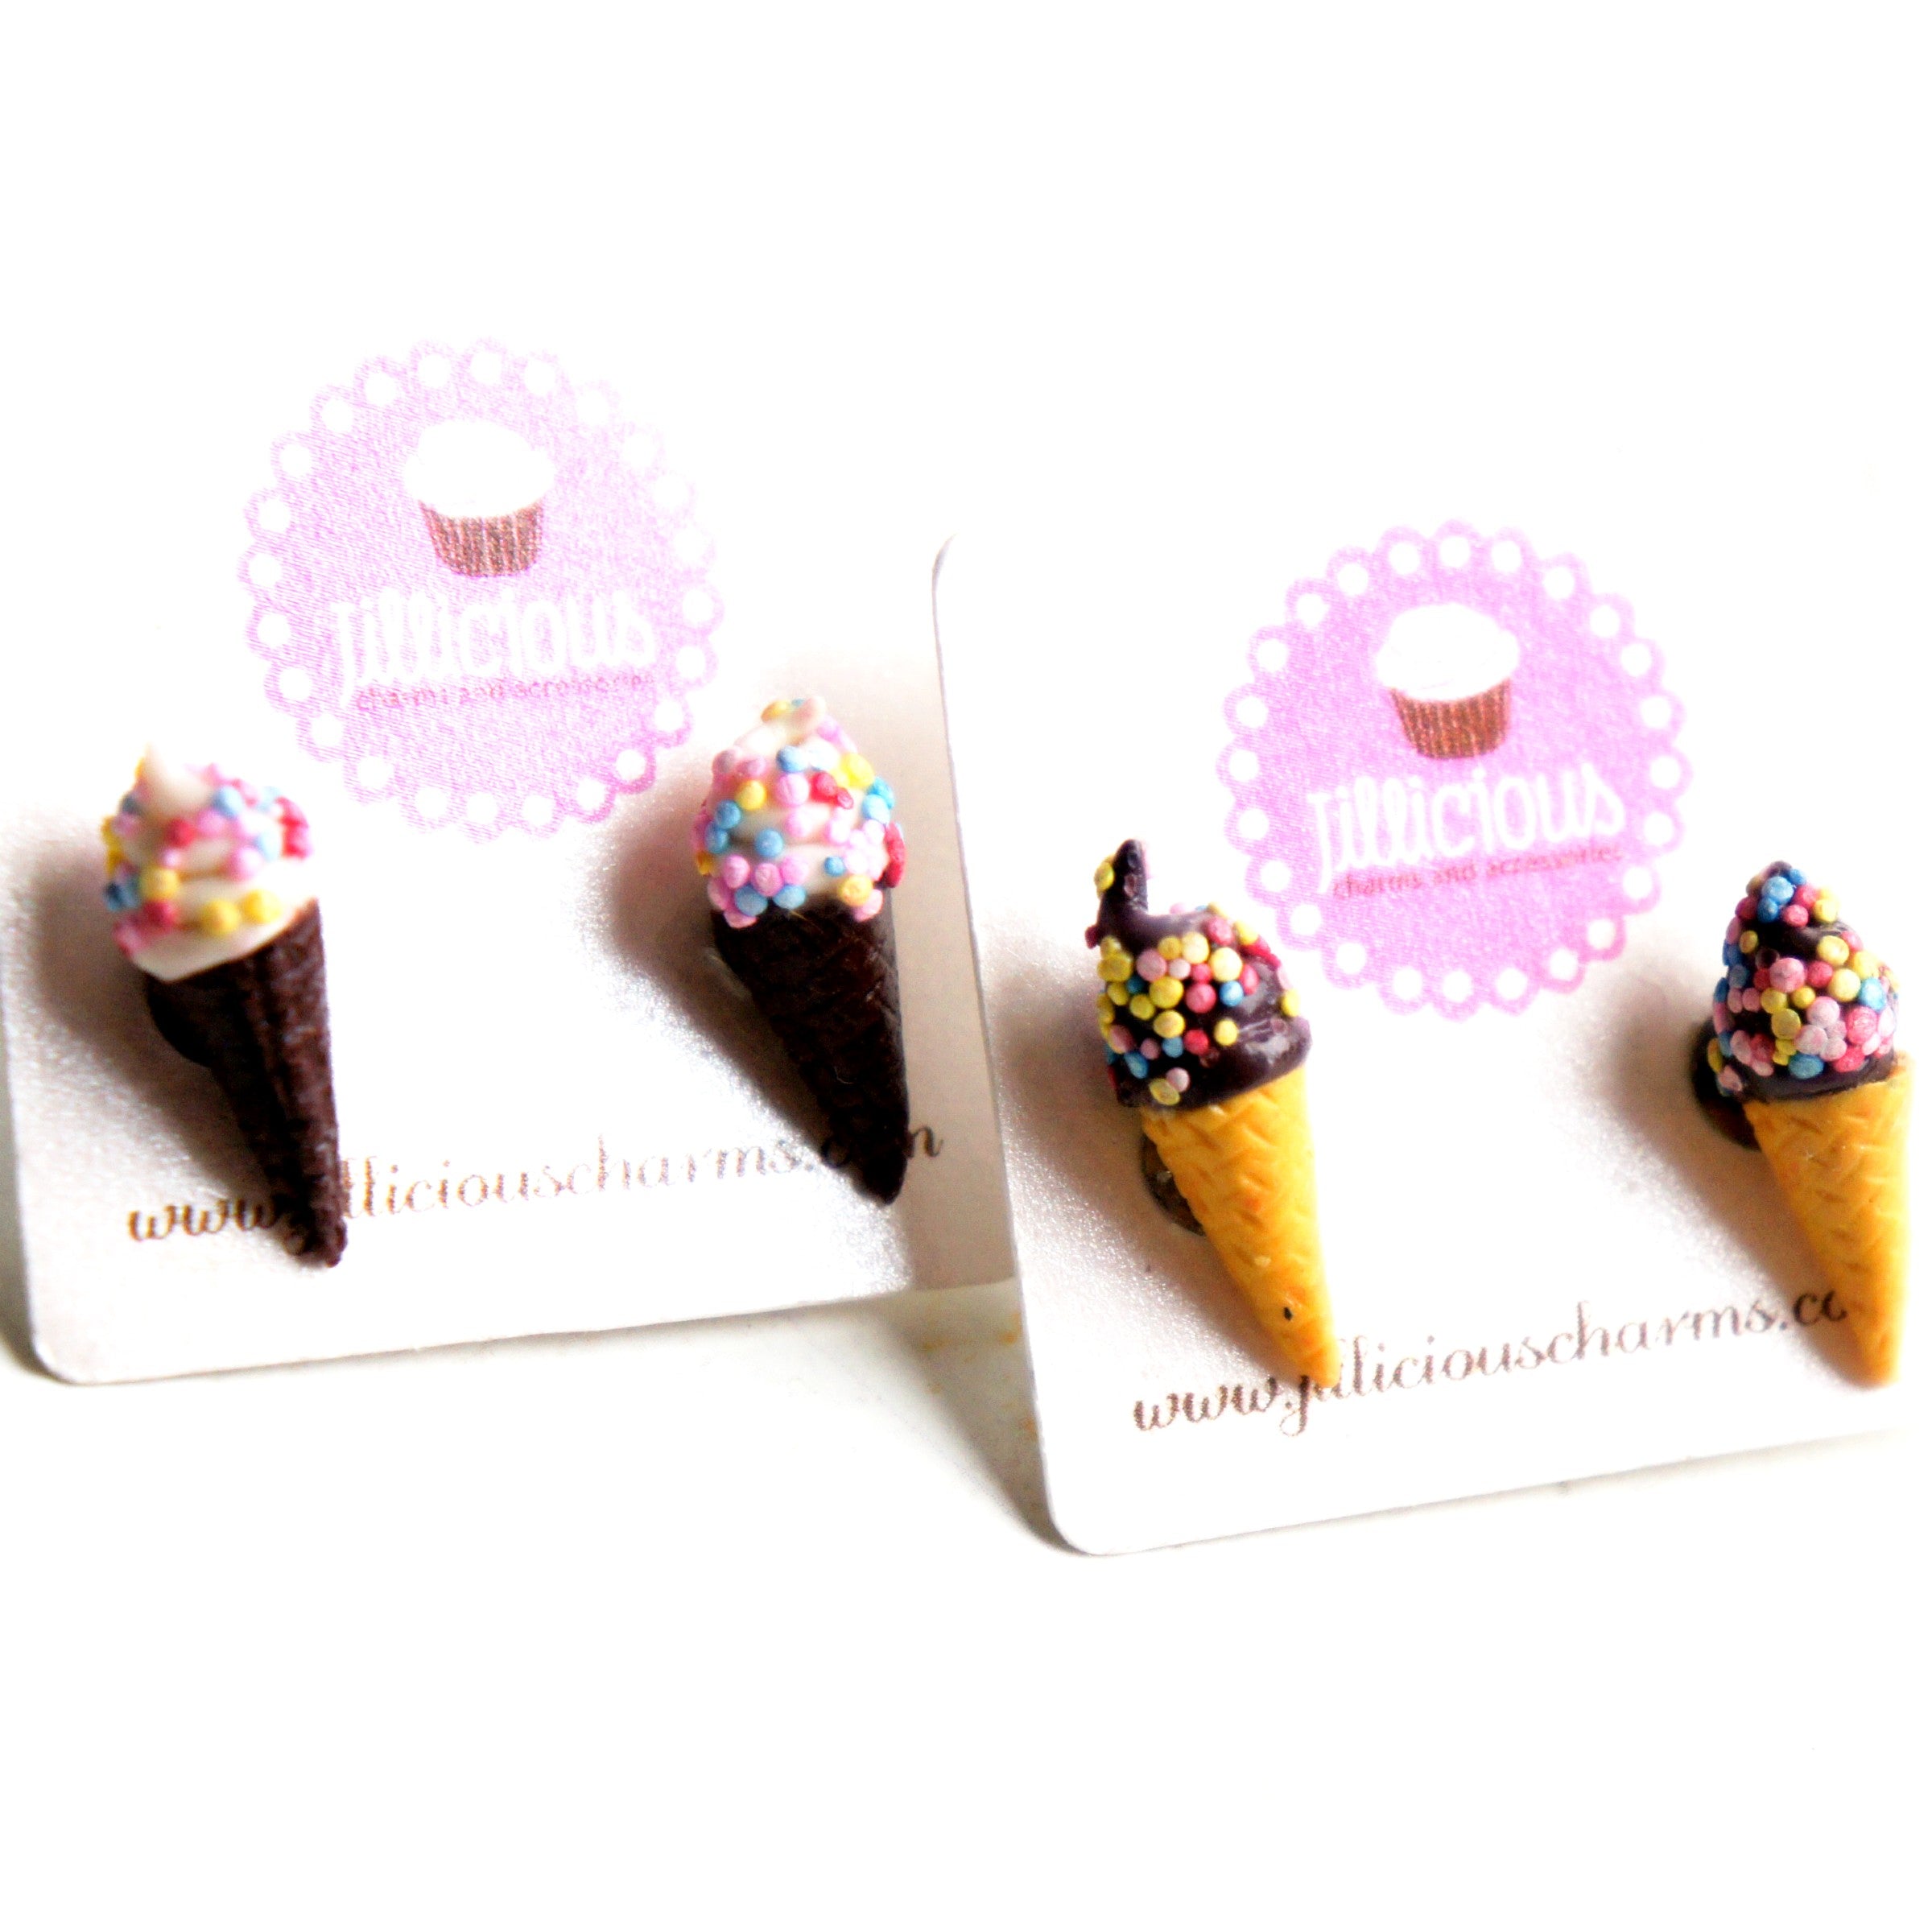 Sprinkles Ice Cream Cone Stud Earrings - Jillicious charms and accessories